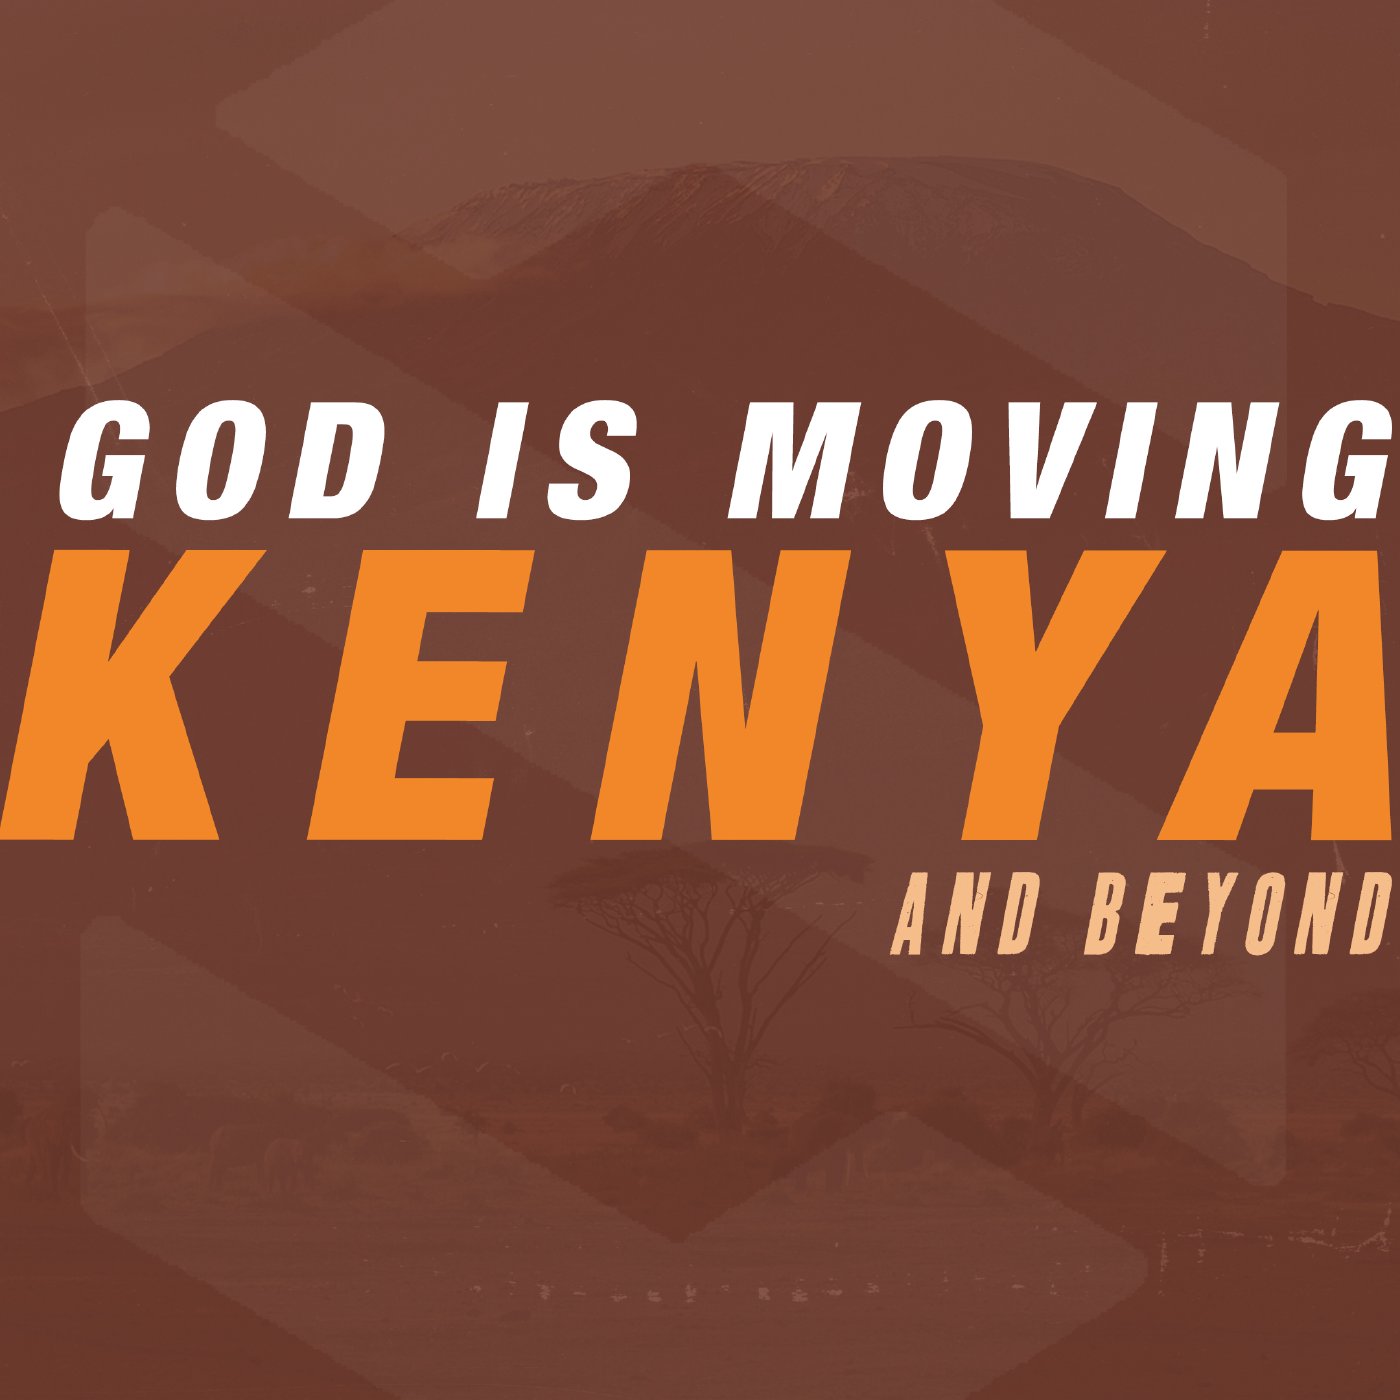 God is Moving; Kenya and beyond